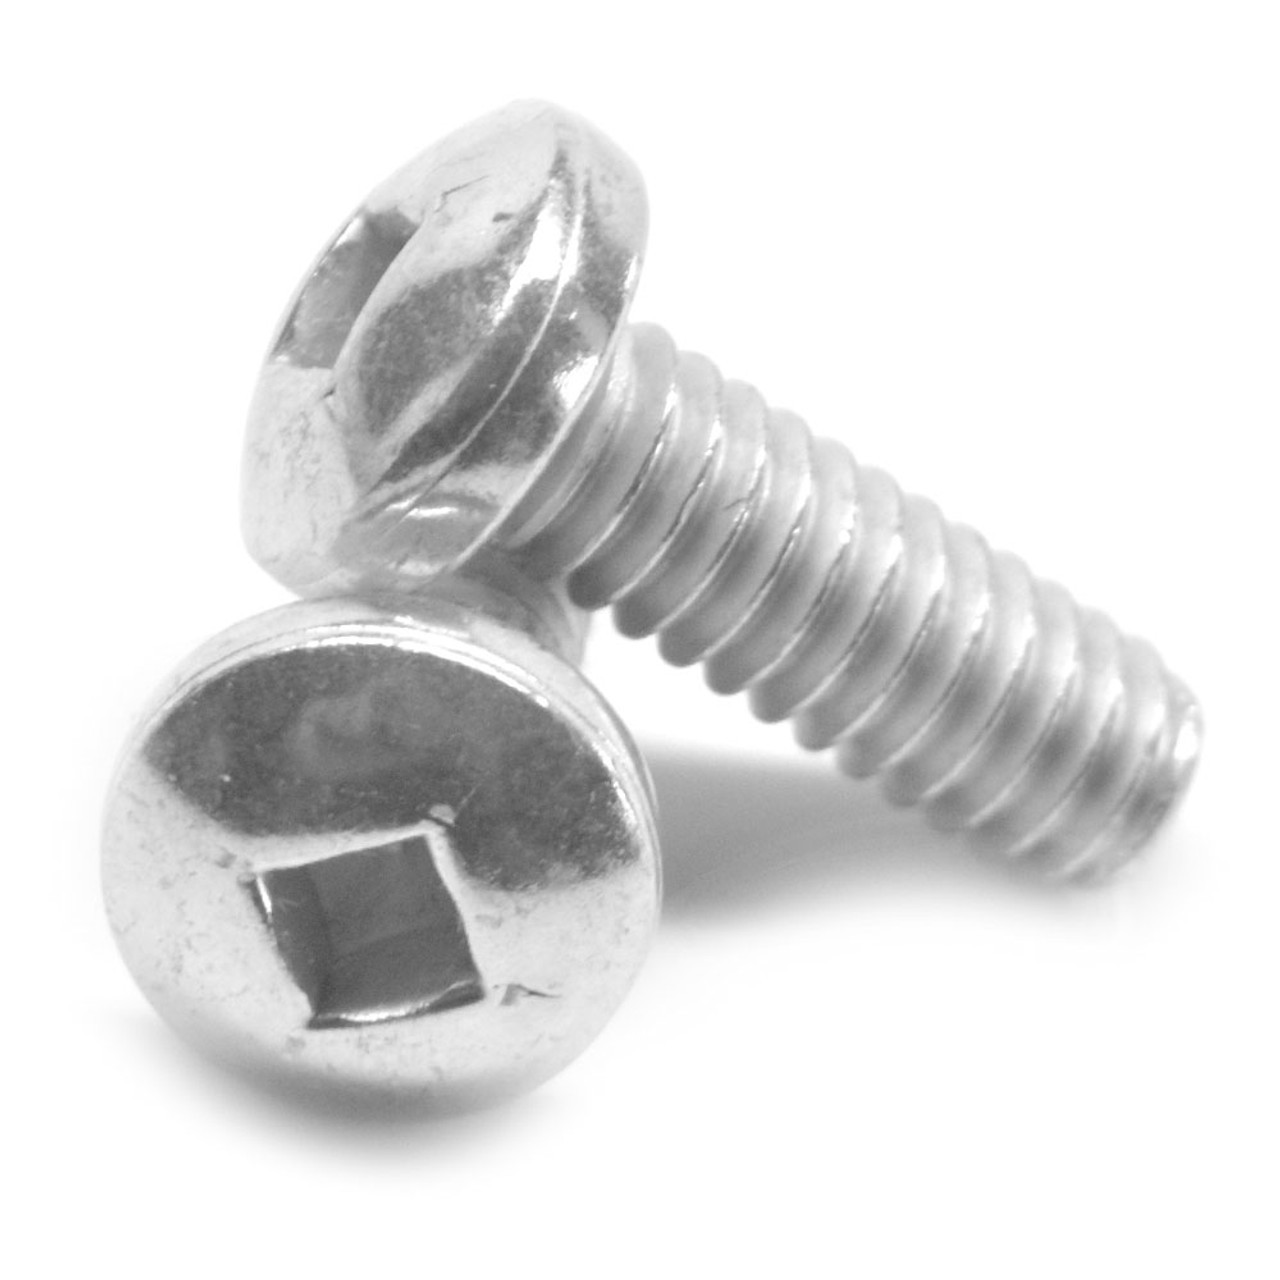 #8-32 x 1/2" (FT) Coarse Thread Machine Screw Square Drive Pan Head Stainless Steel 18-8